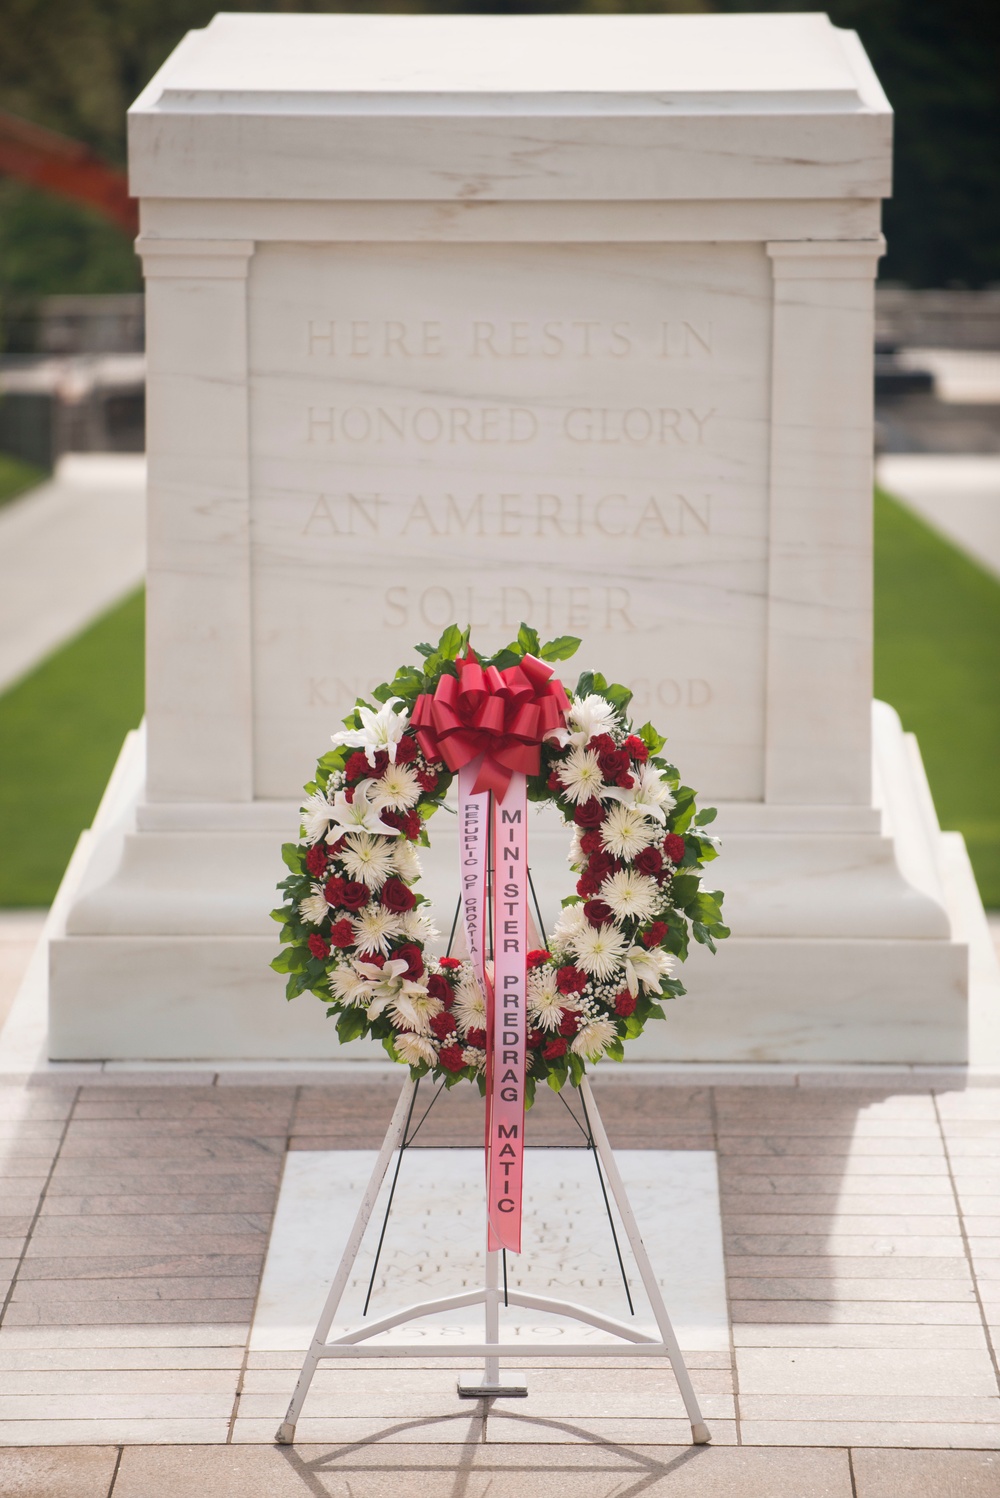 The wreath laid by Republic of Croatia minister of veterans affairs sits in front of the Tomb of the Unknown Soldier in Arlington National Cemetery